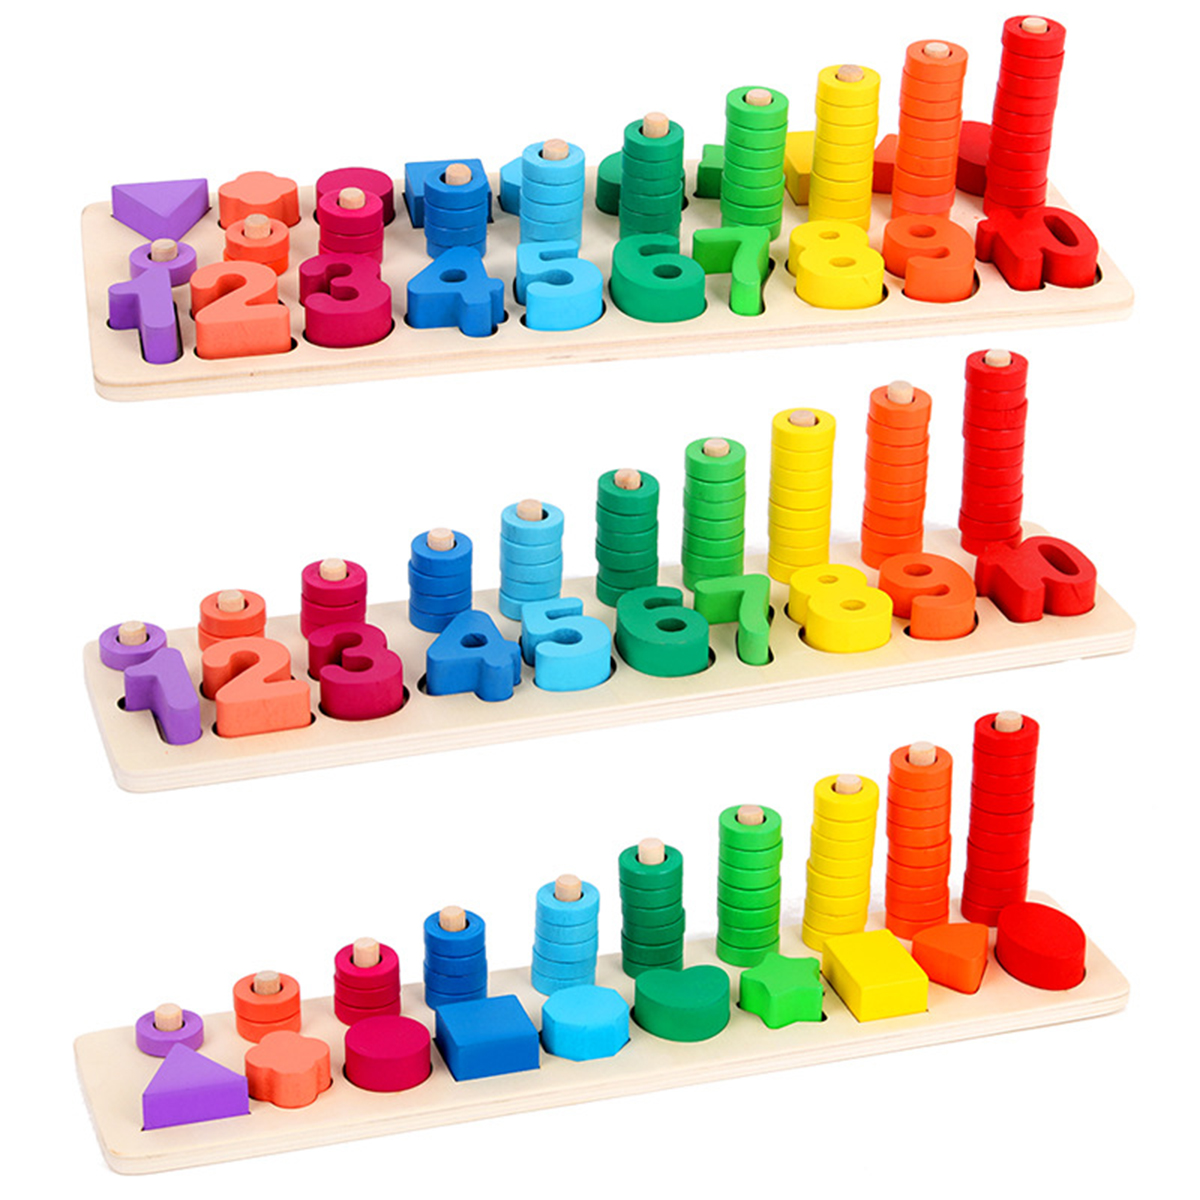 Children-Wooden-Montessori-Materials-Learning-To-Count-Numbers-Matching-Digital-Shape-Match-Early-Ed-1605437-3